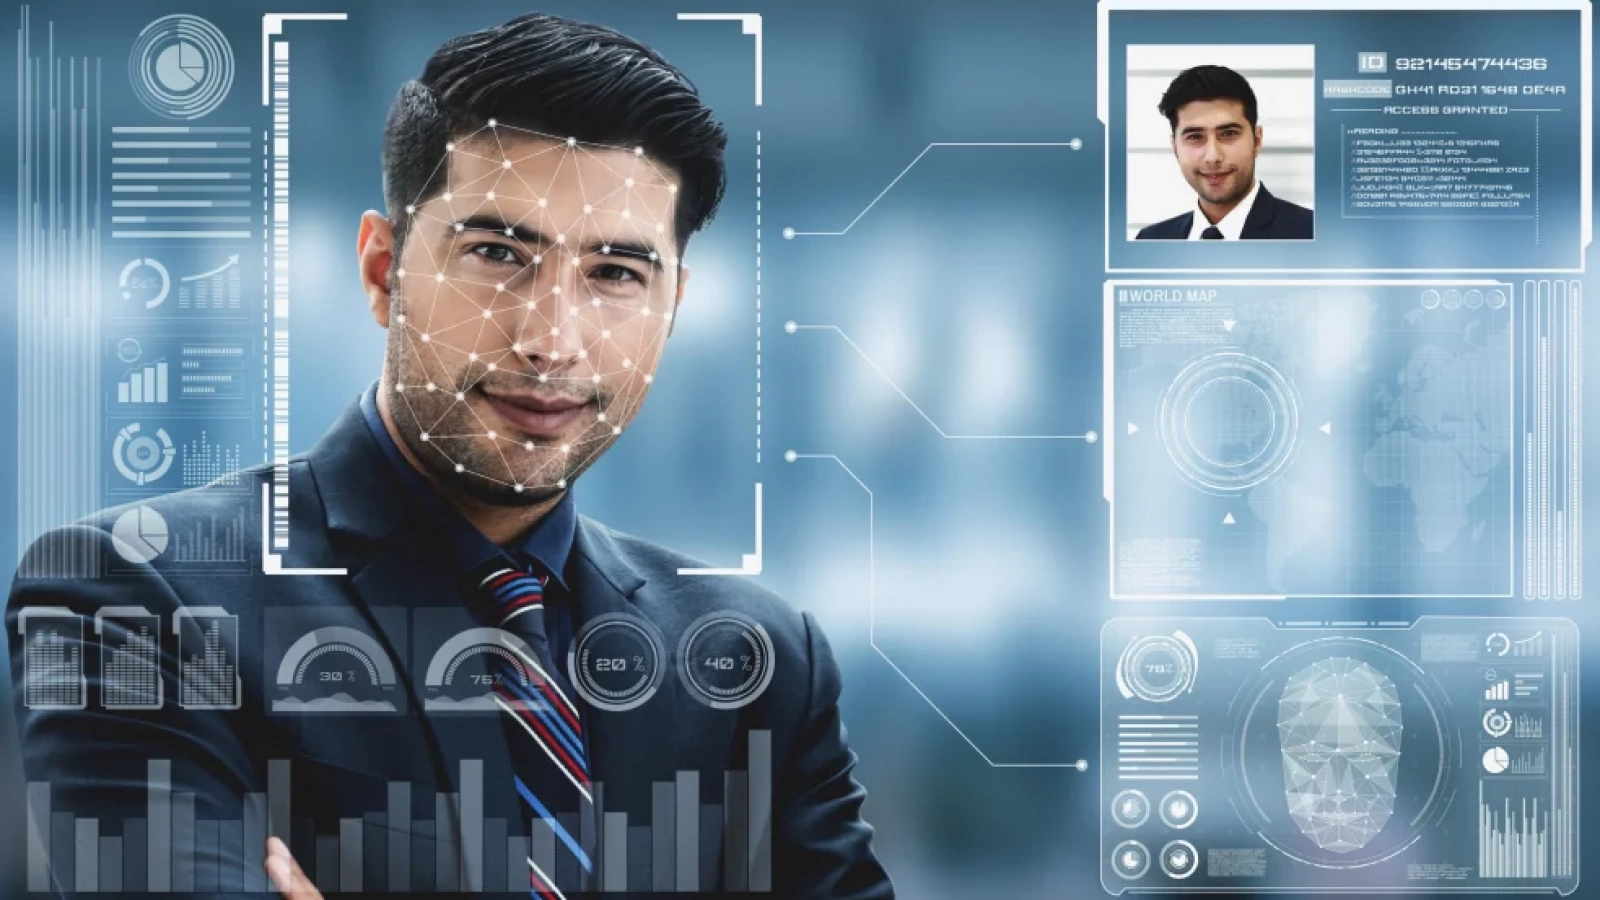 facial-recognition-technology-scan-detect-people-face-identification (1)